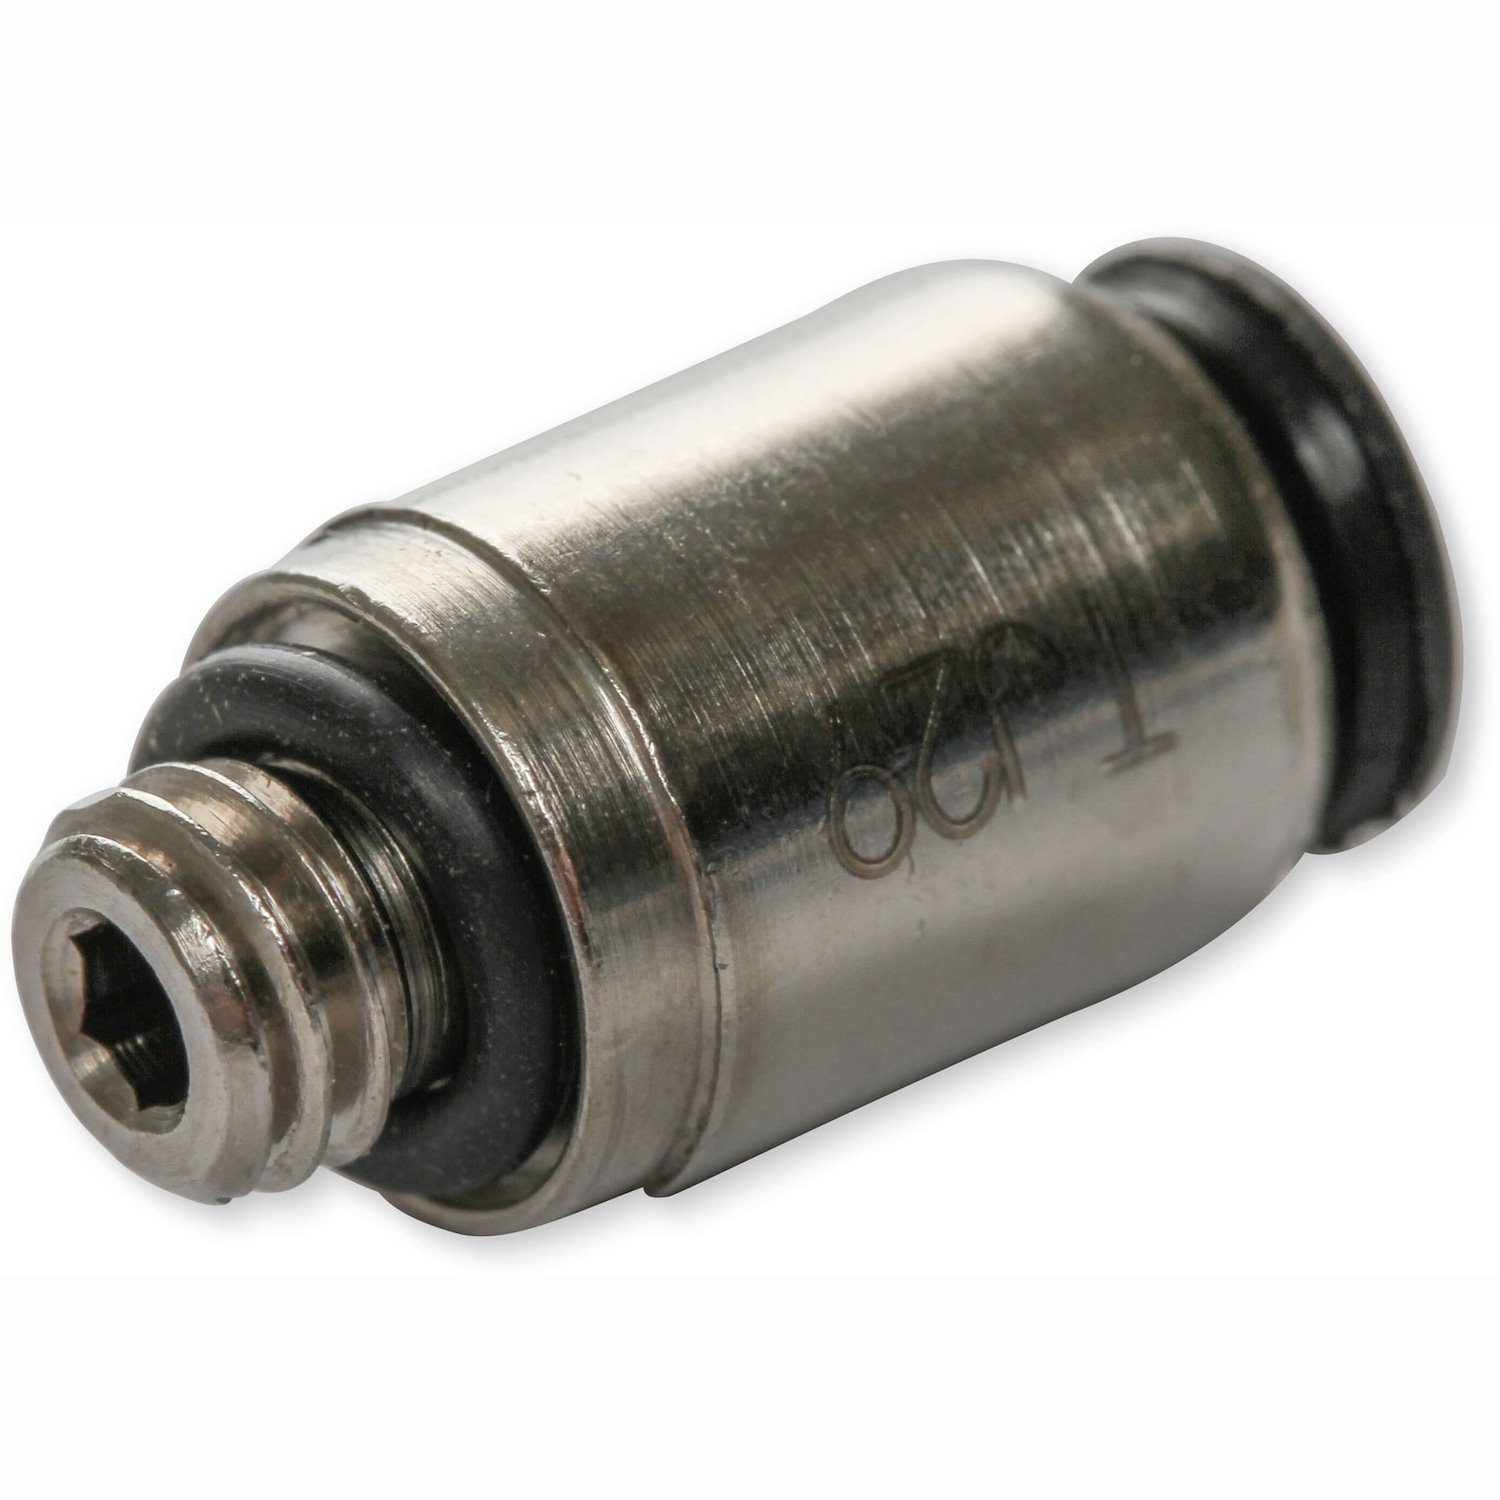 Push Lock Compression Fitting [10-32 Male to 1/8